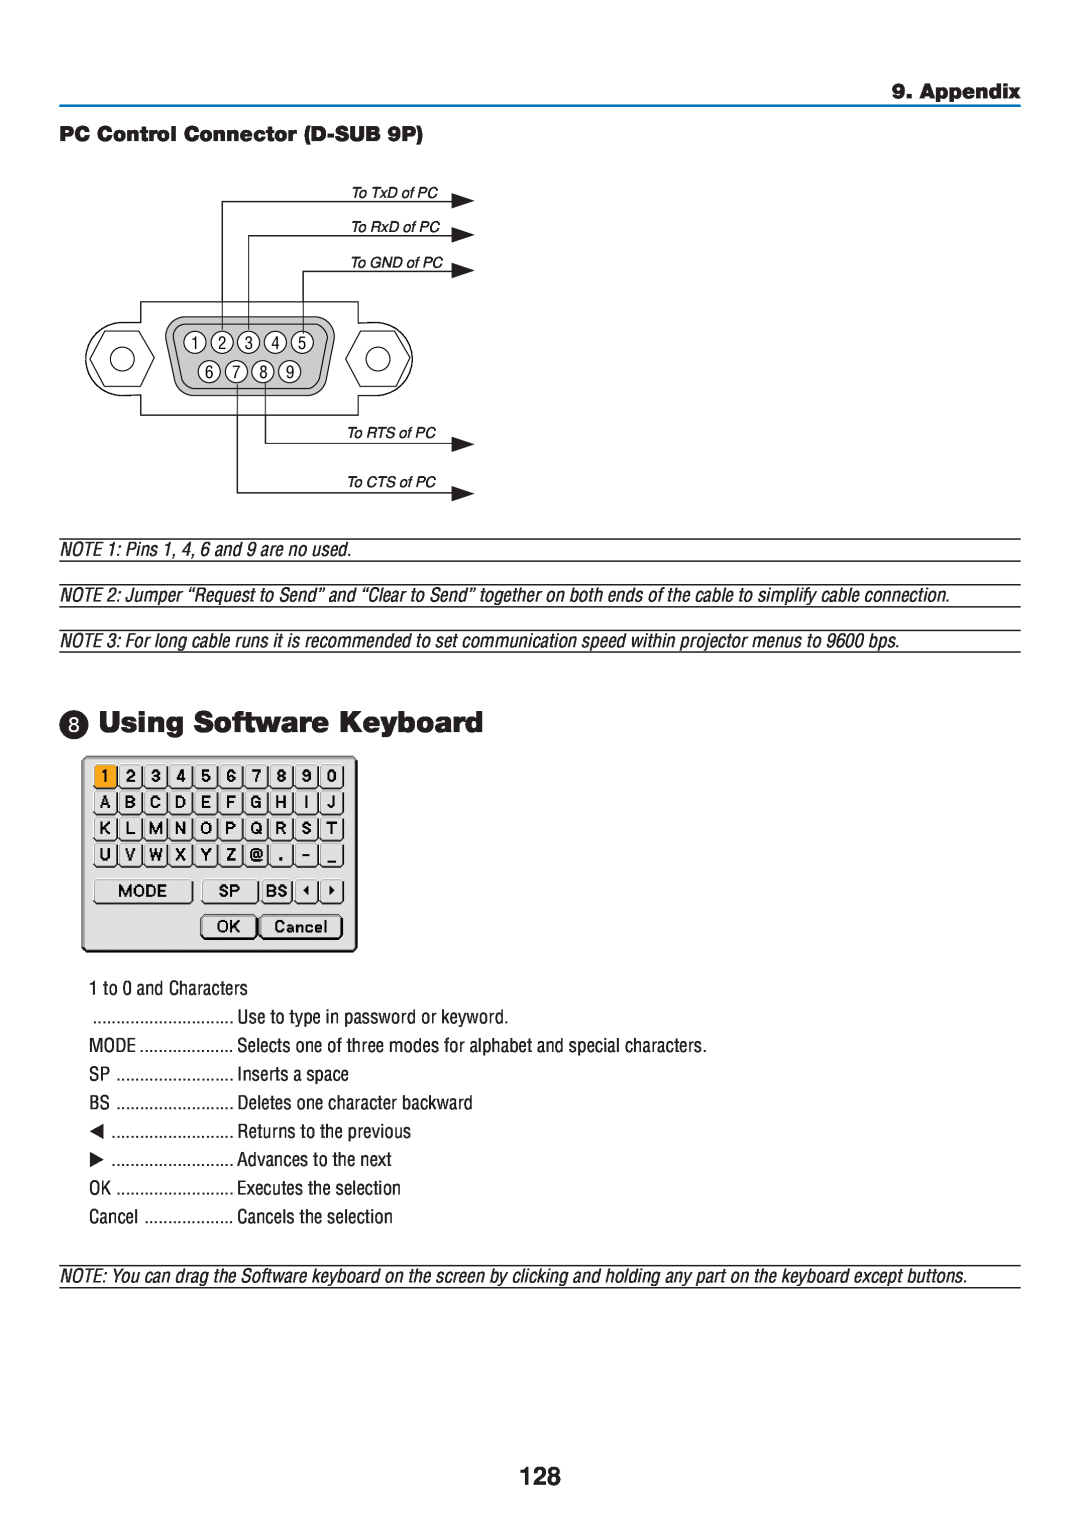 Dukane 8808 user manual Using Software Keyboard, Appendix PC Control Connector D-SUB 9P, Mode 